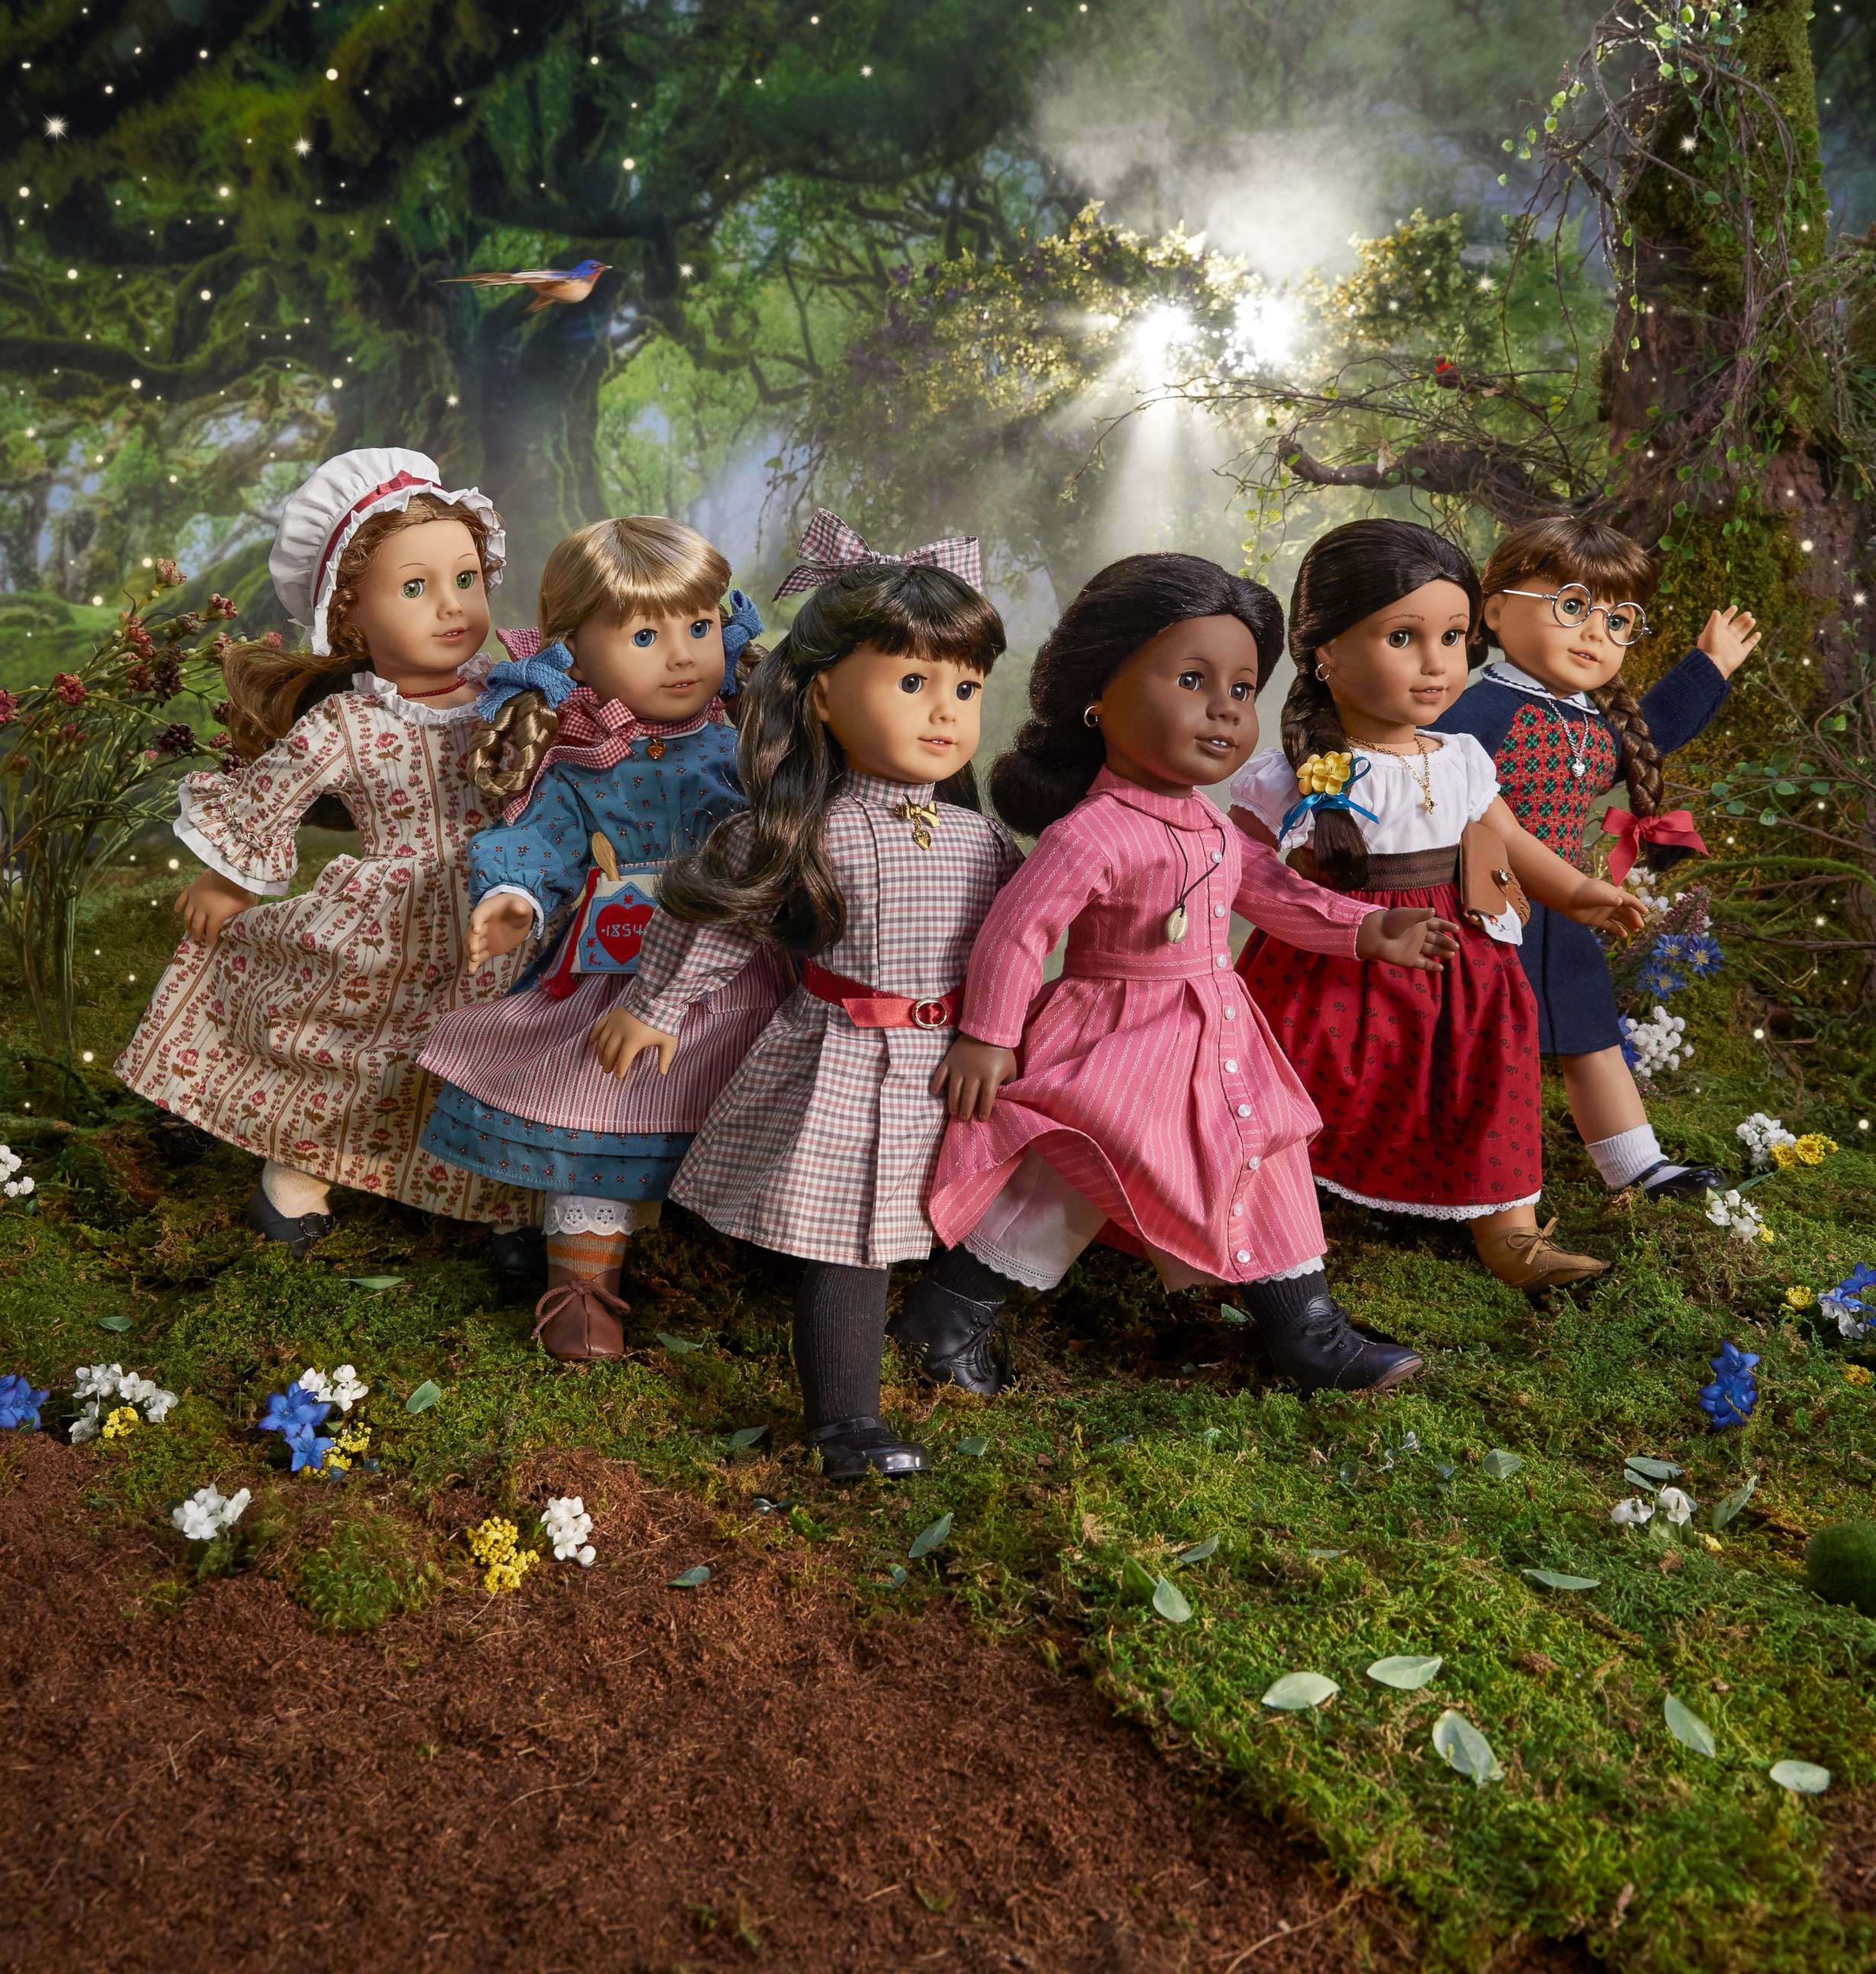 PHOTO: American Girl is celebrating its 35th birthday by reintroducing its six original characters in a special anniversary collection.